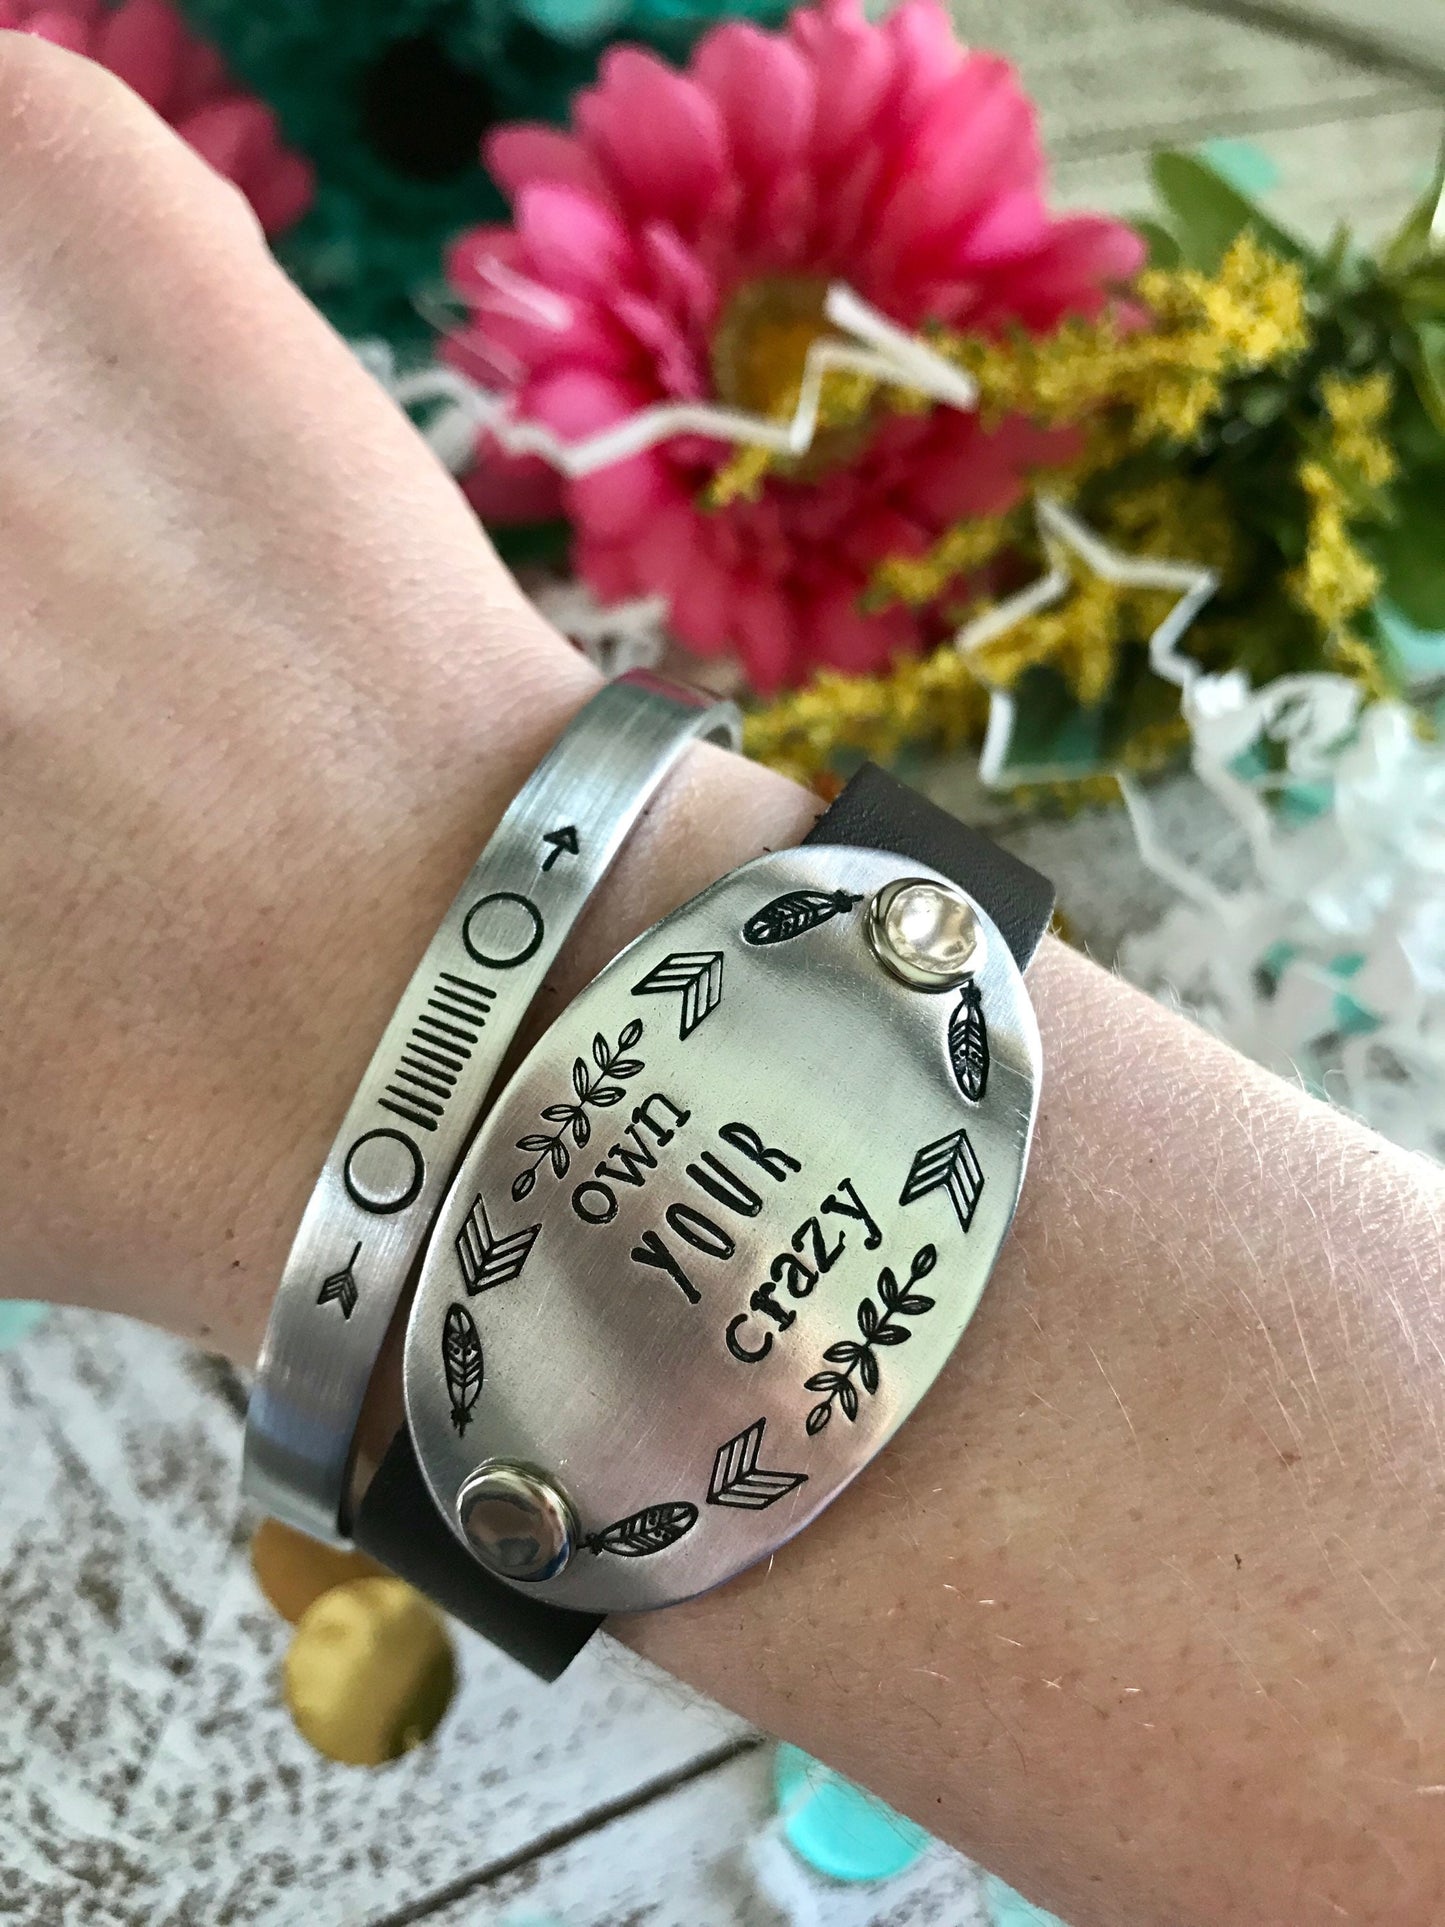 Storms Make Trees Take Deeper Roots Leather Cuff Bracelet--encouragement gift--inspirational jewelry--Stronger than Yesterday--Stay Strong